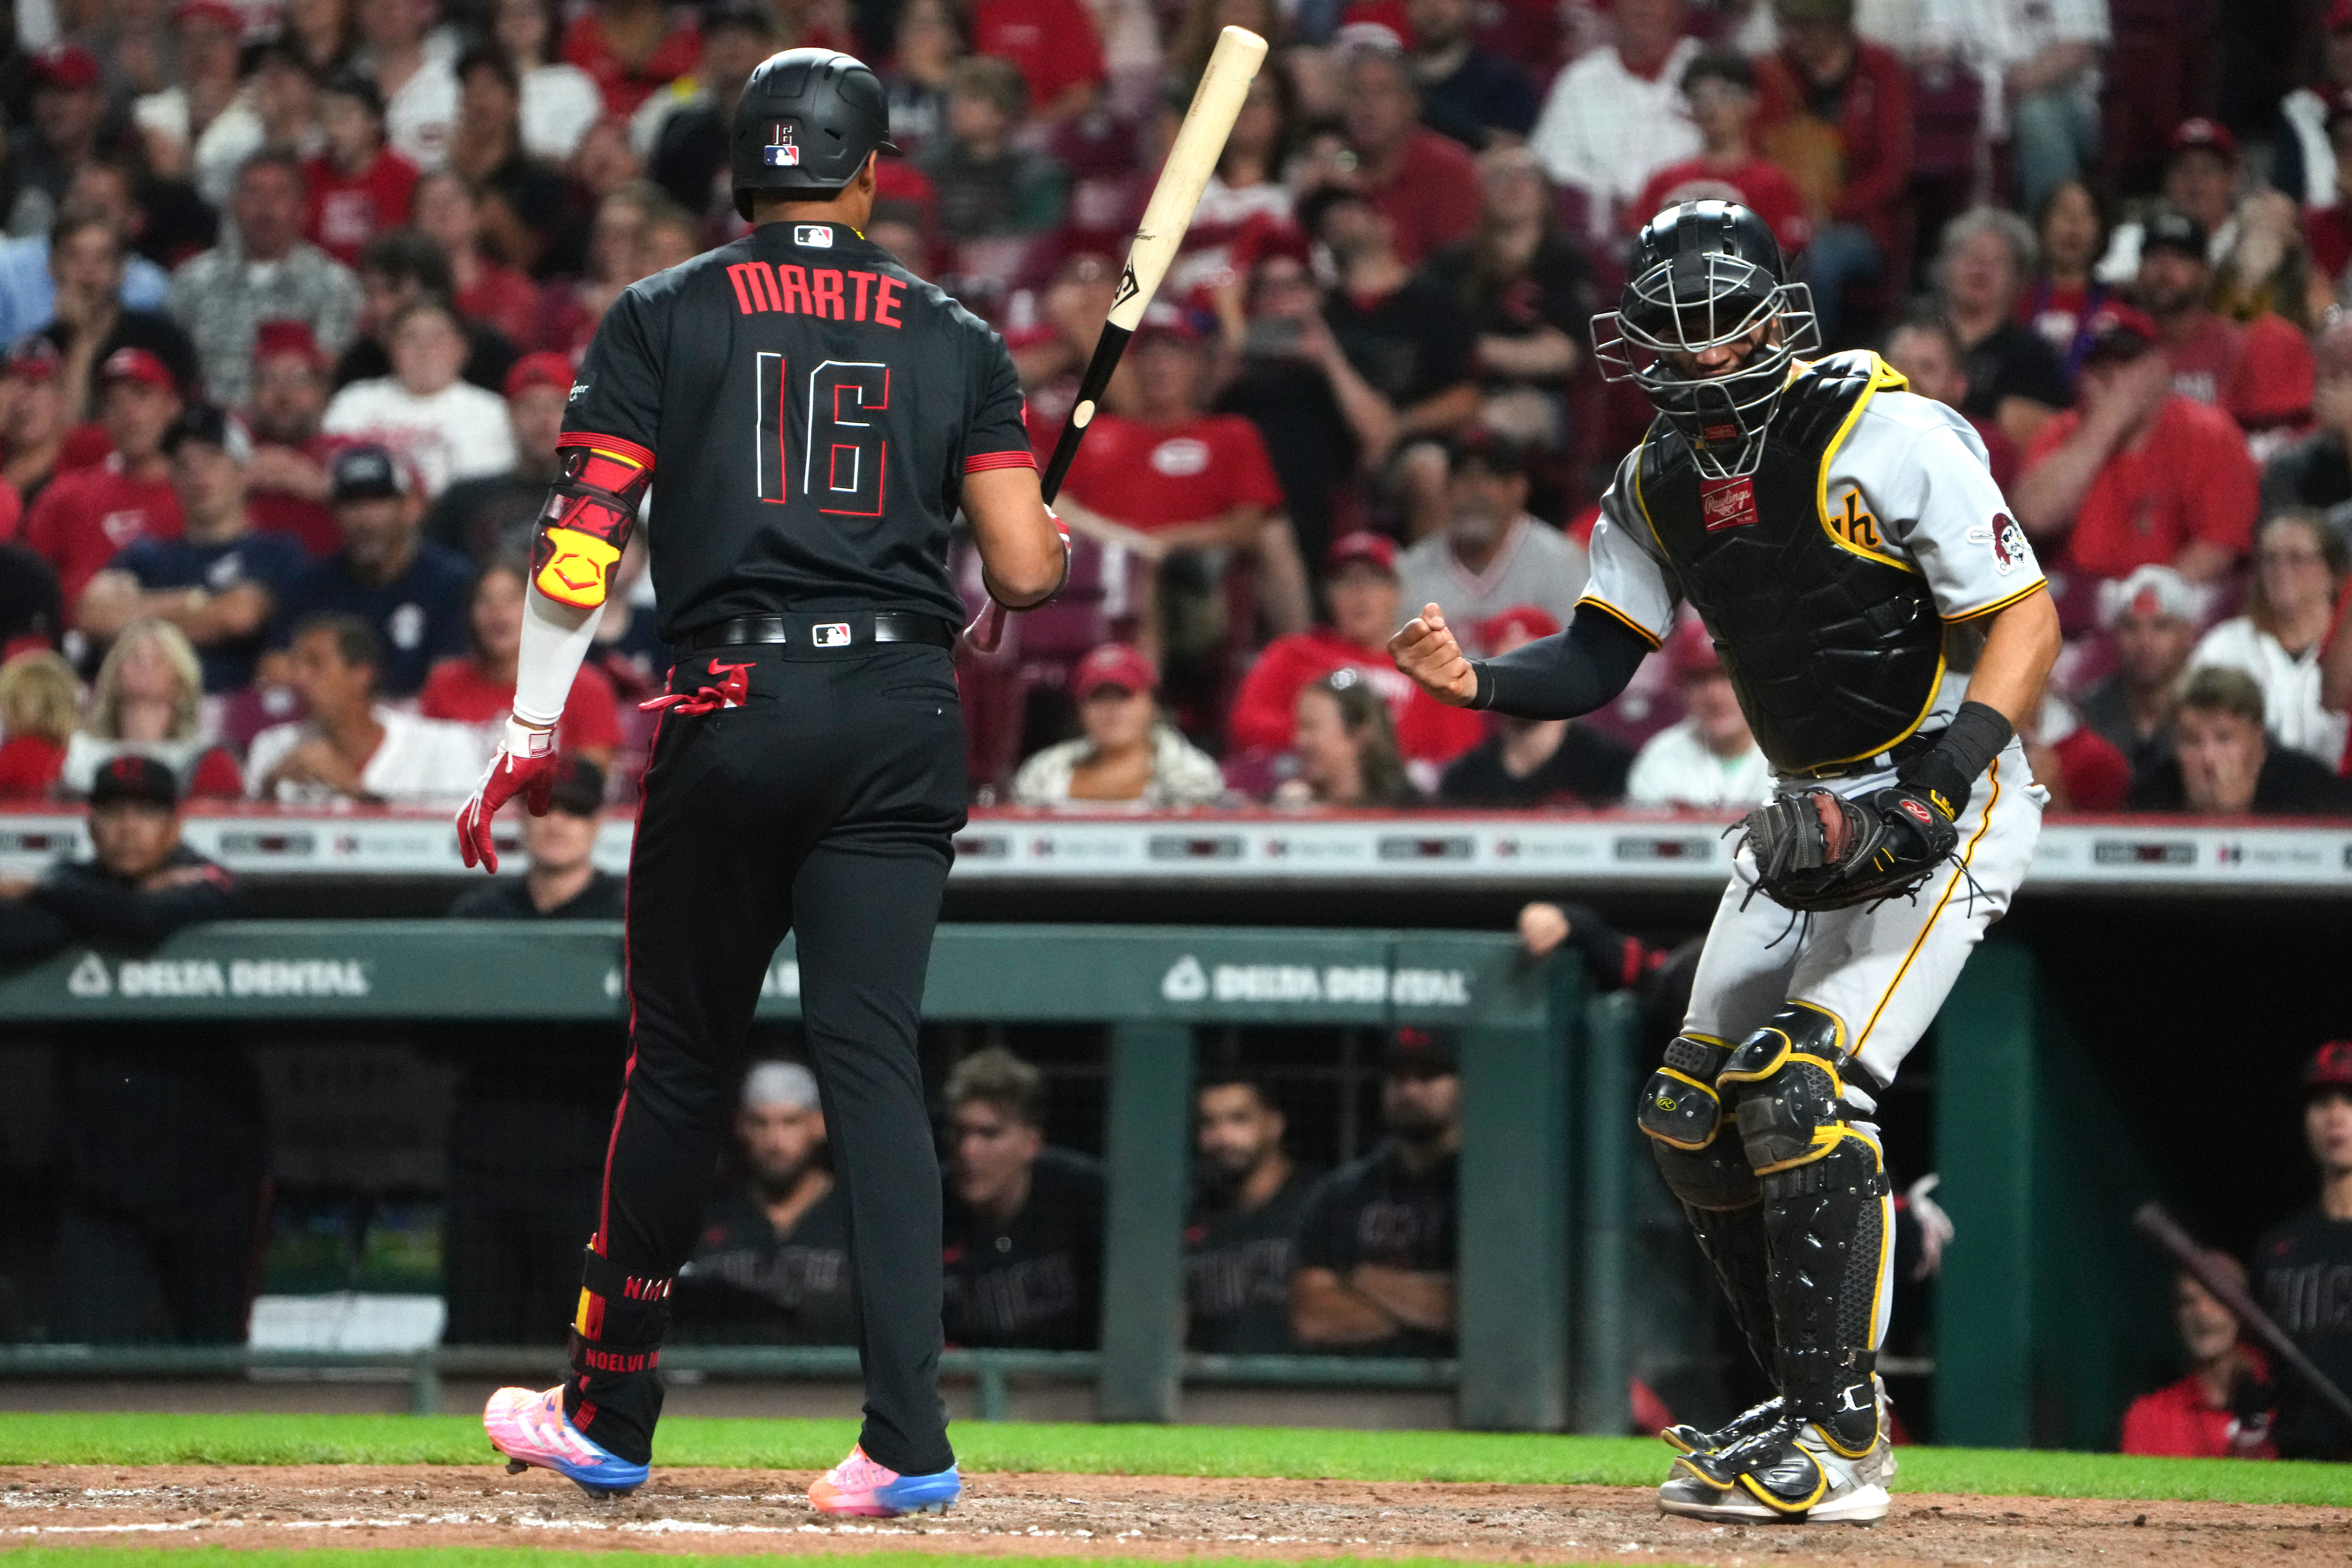 Cincinnati Reds won't wait for results to activate Noelvi Marte after steroid suspension